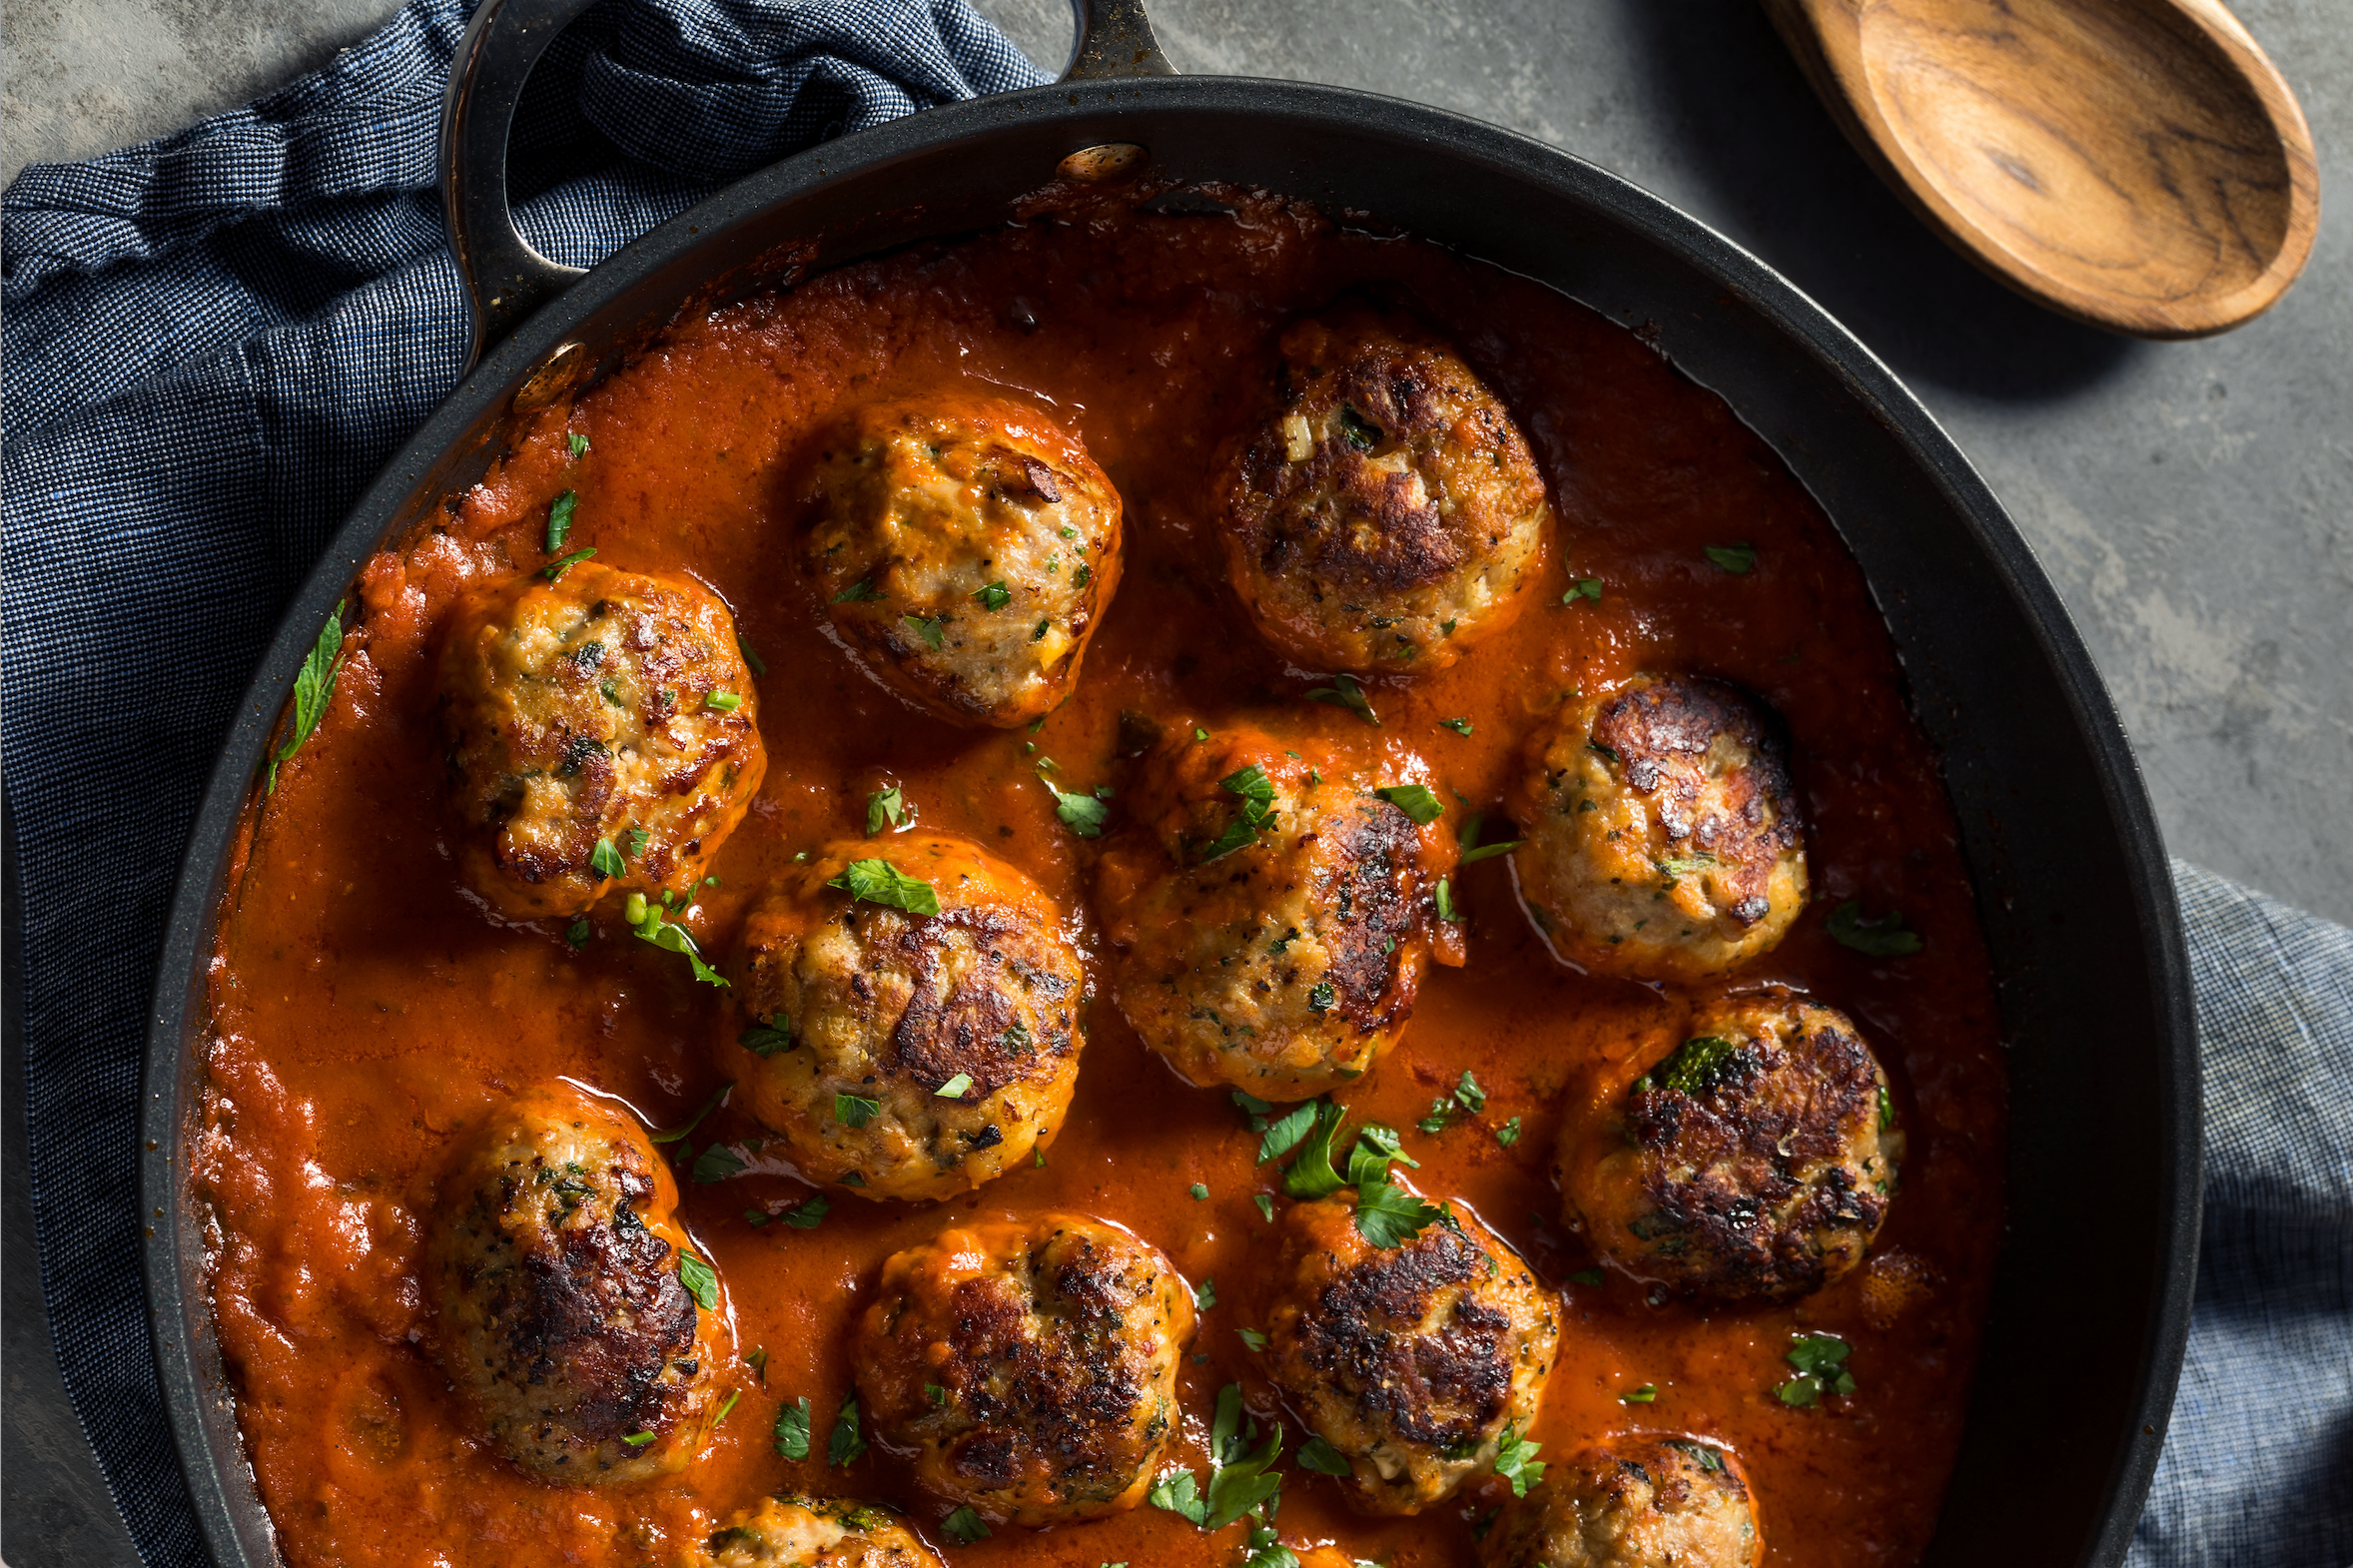 Chicken Meatballs with a Smoky Tomato Sauce